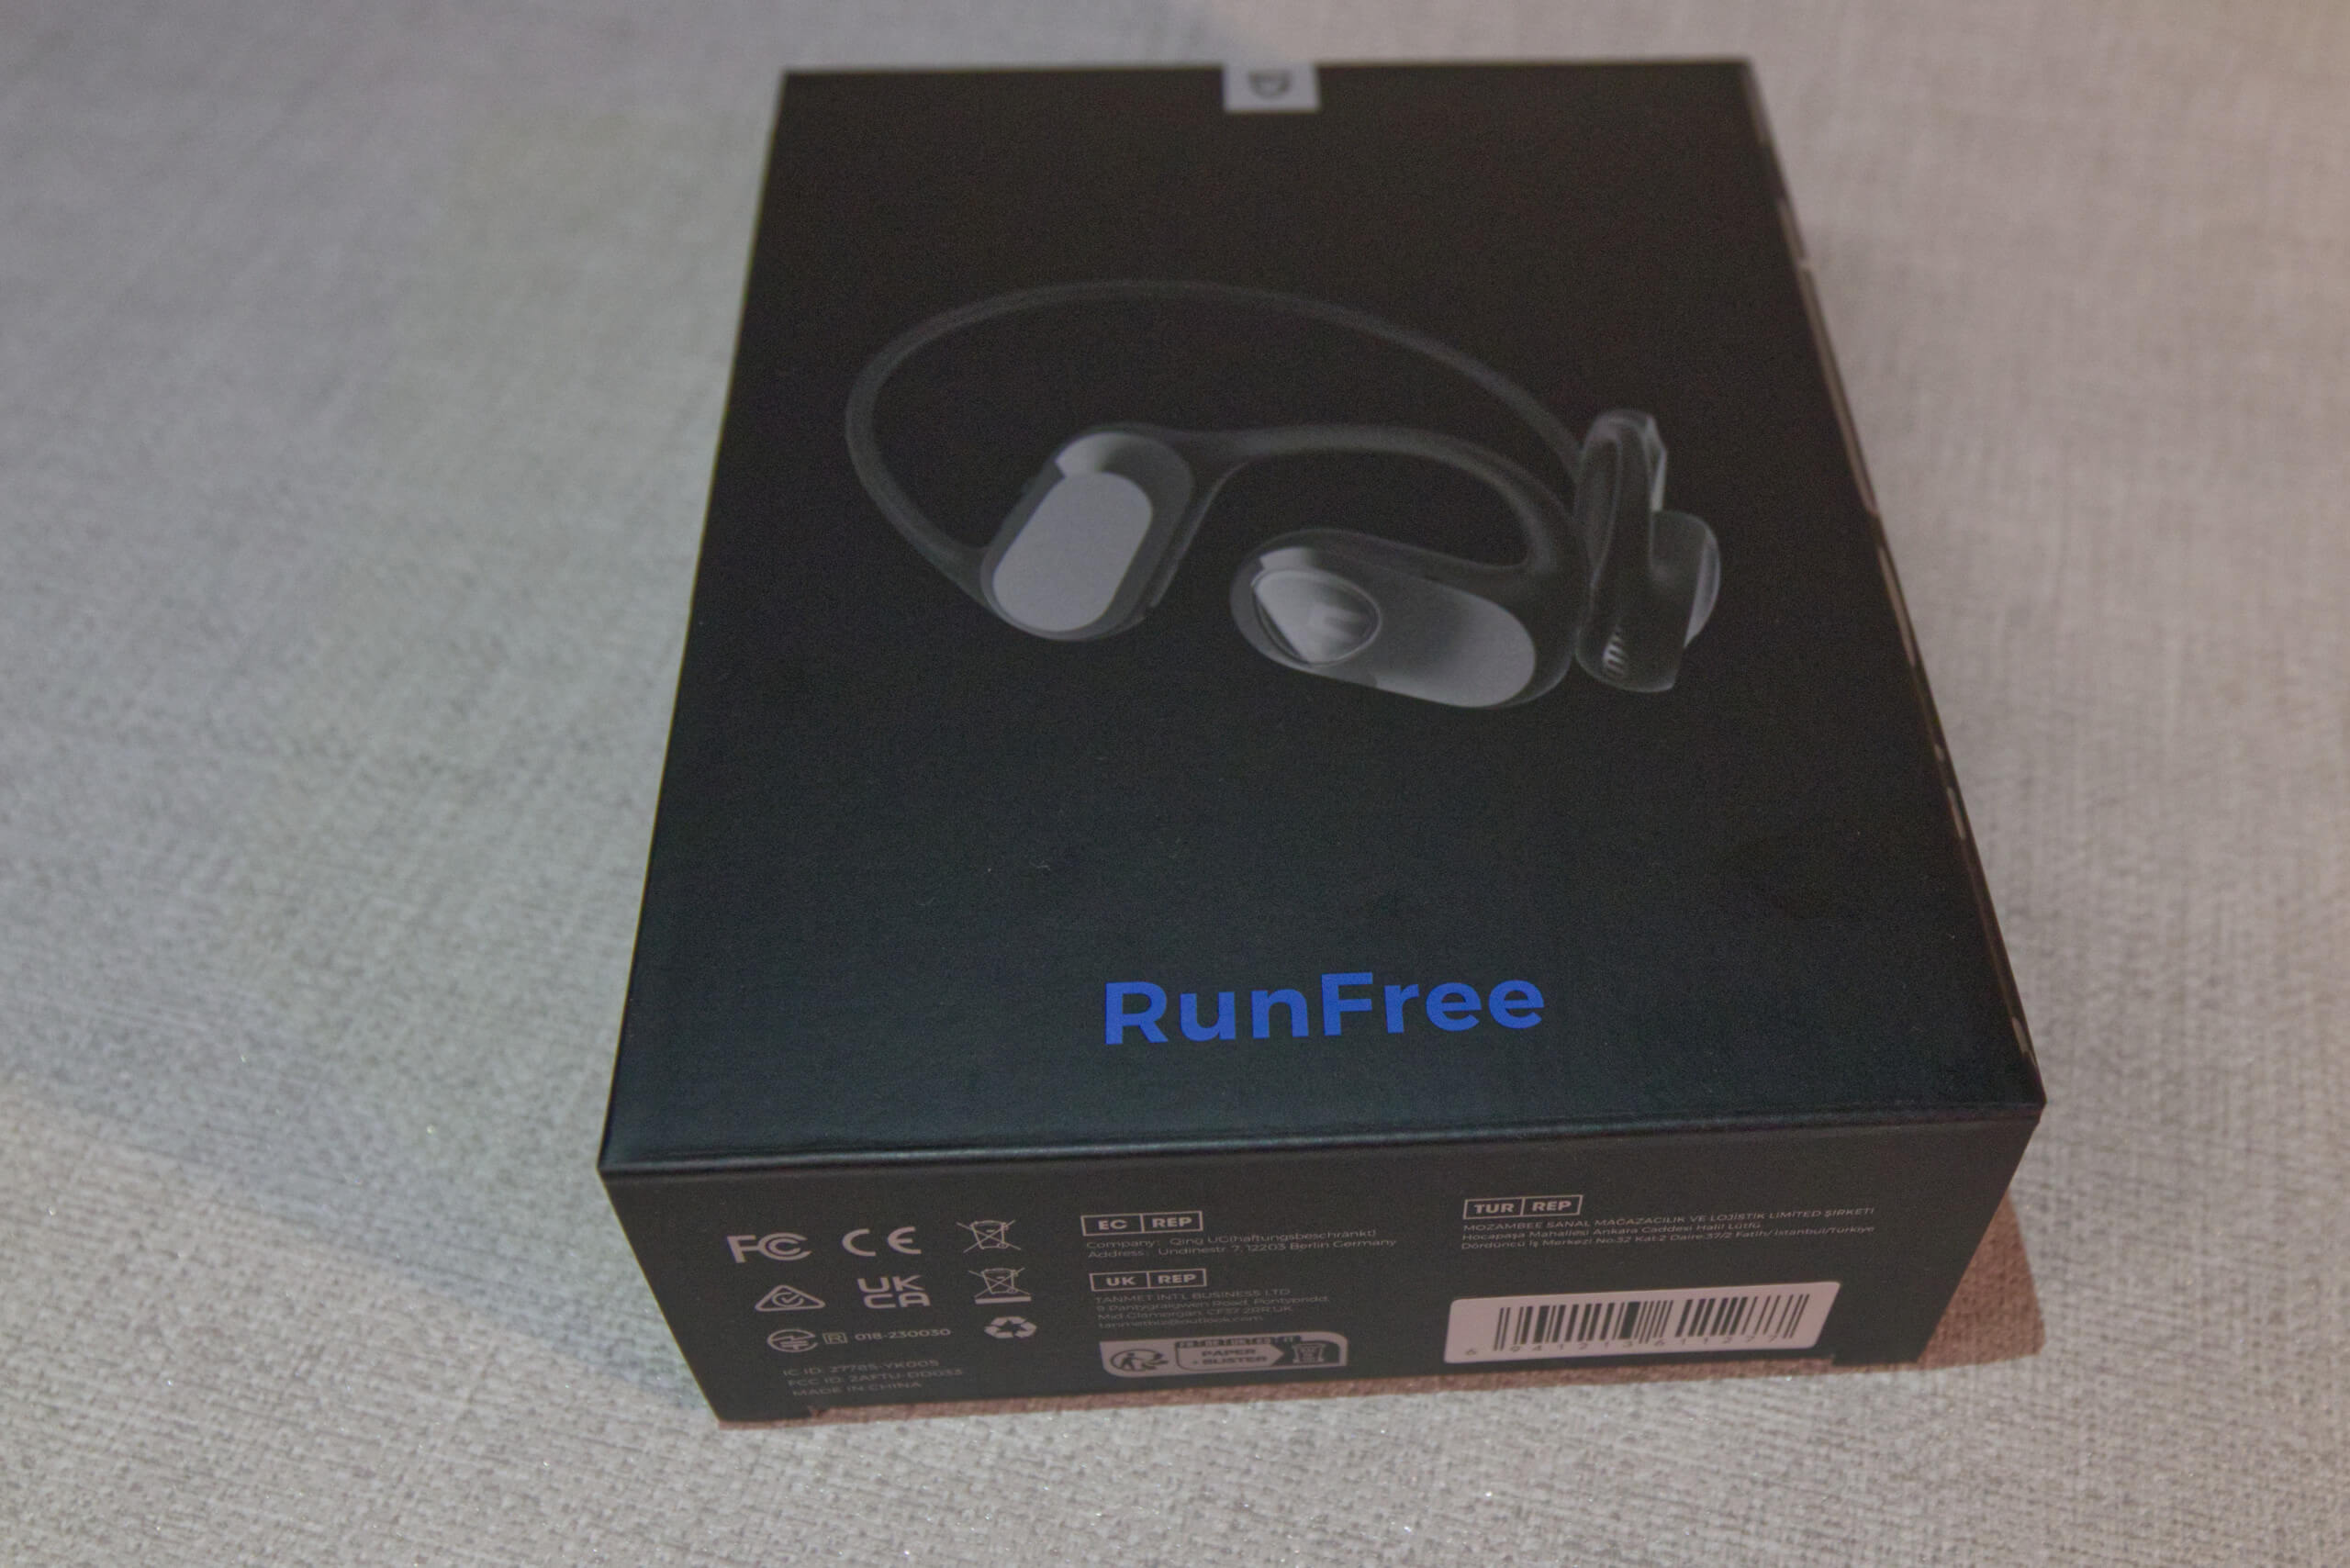 Photo shows the SoundPeats RunFree headphones in their original packaging/box. The box is a dark grey with blue logo, and the earphones are pictured in the centre